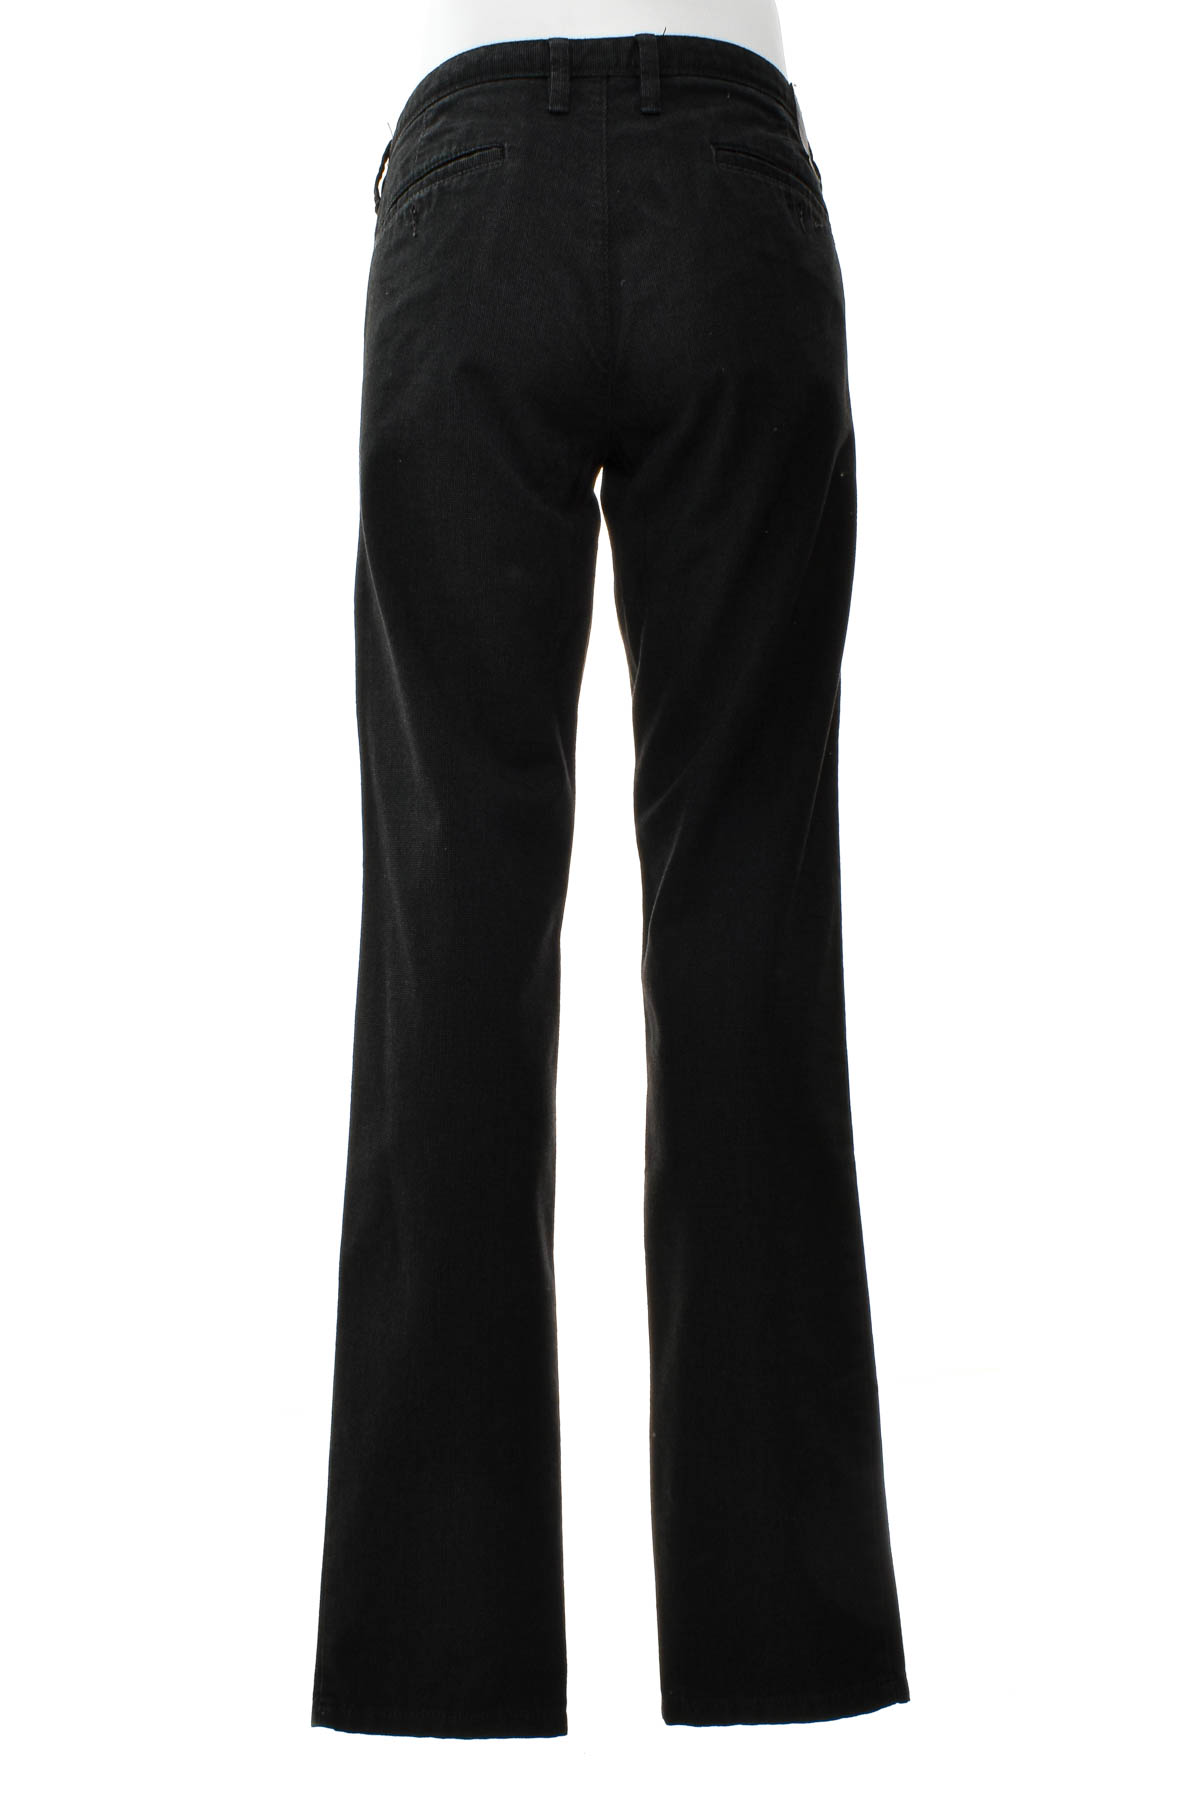 Men's trousers - Redpoint - 1